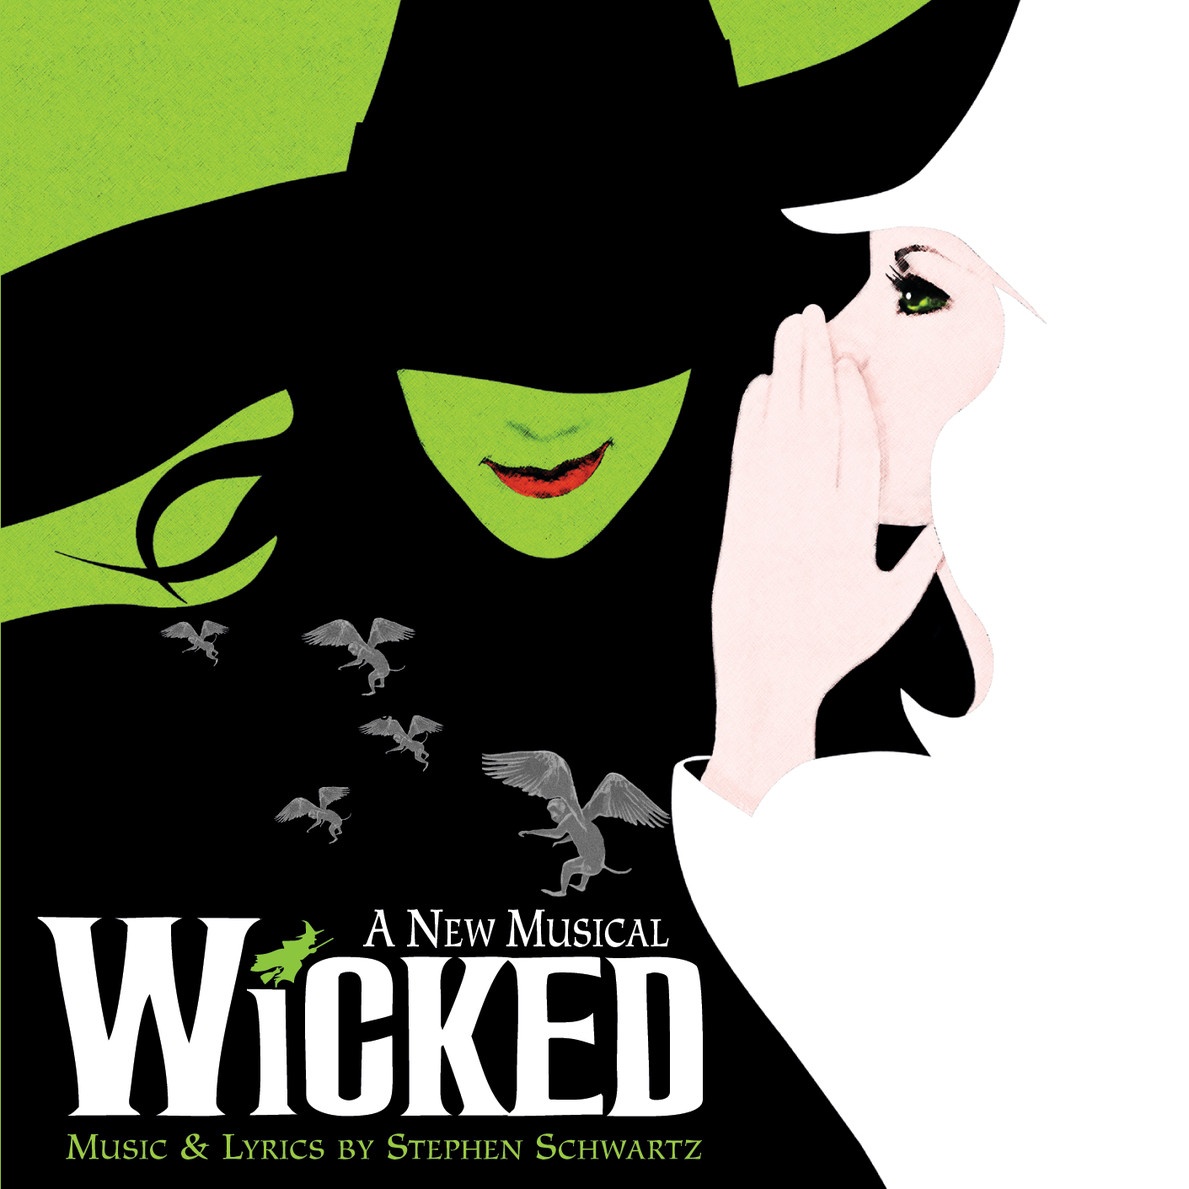 What Is This Feeling? - From "Wicked" Original Broadway Cast Recording/2003